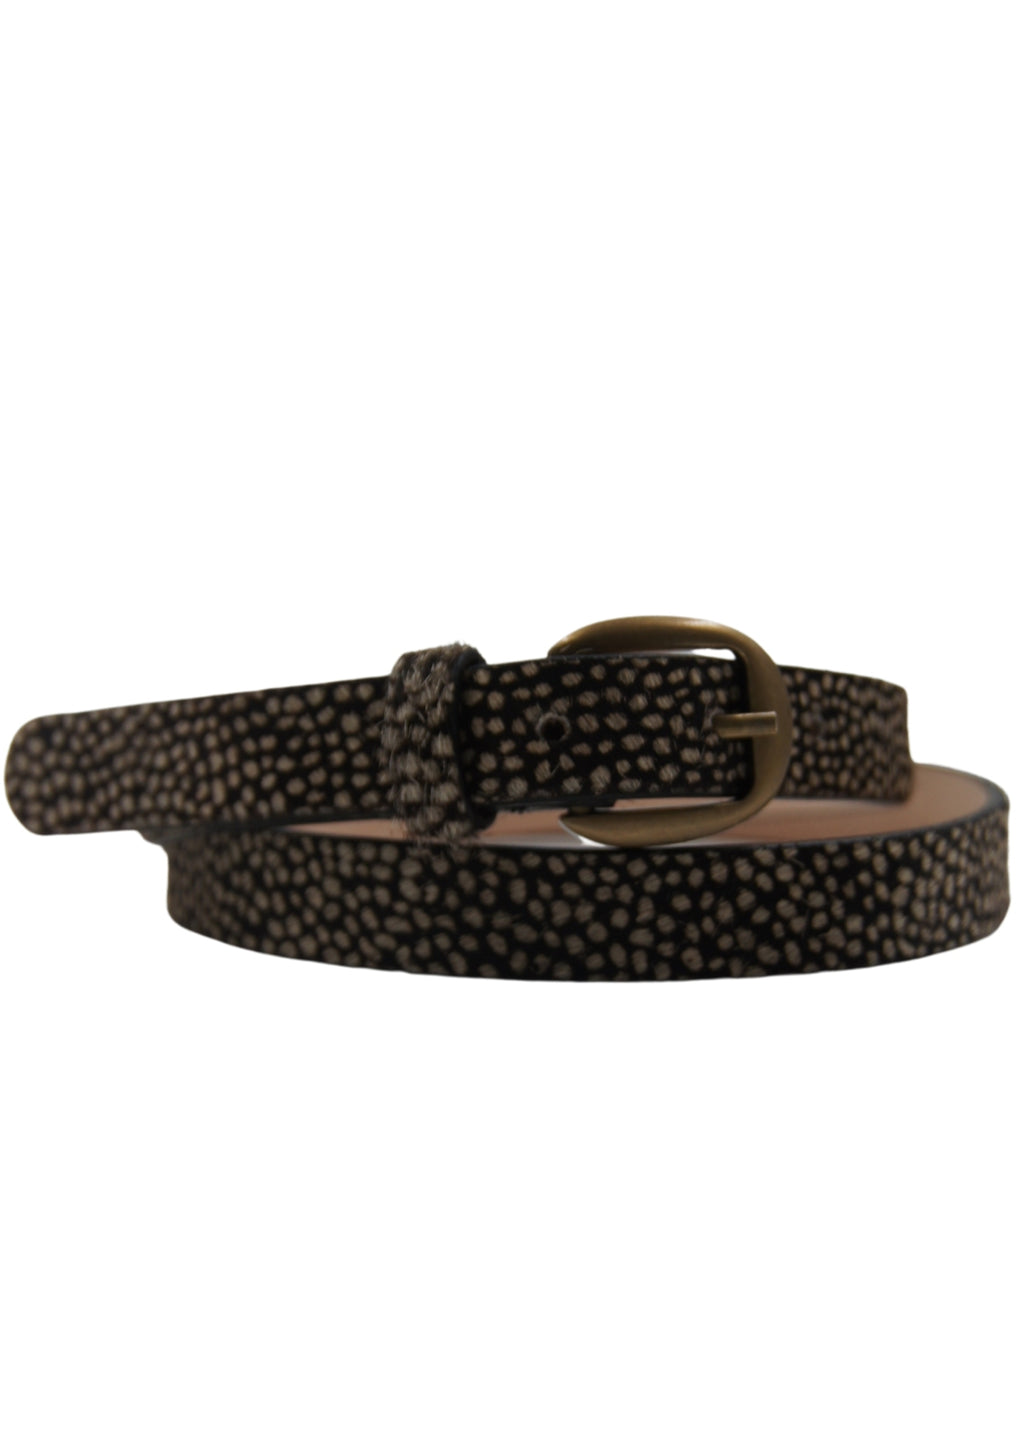 Cheetah Skin Leather Belt With Small Nickle Buckle ( SE-2186_Brown)